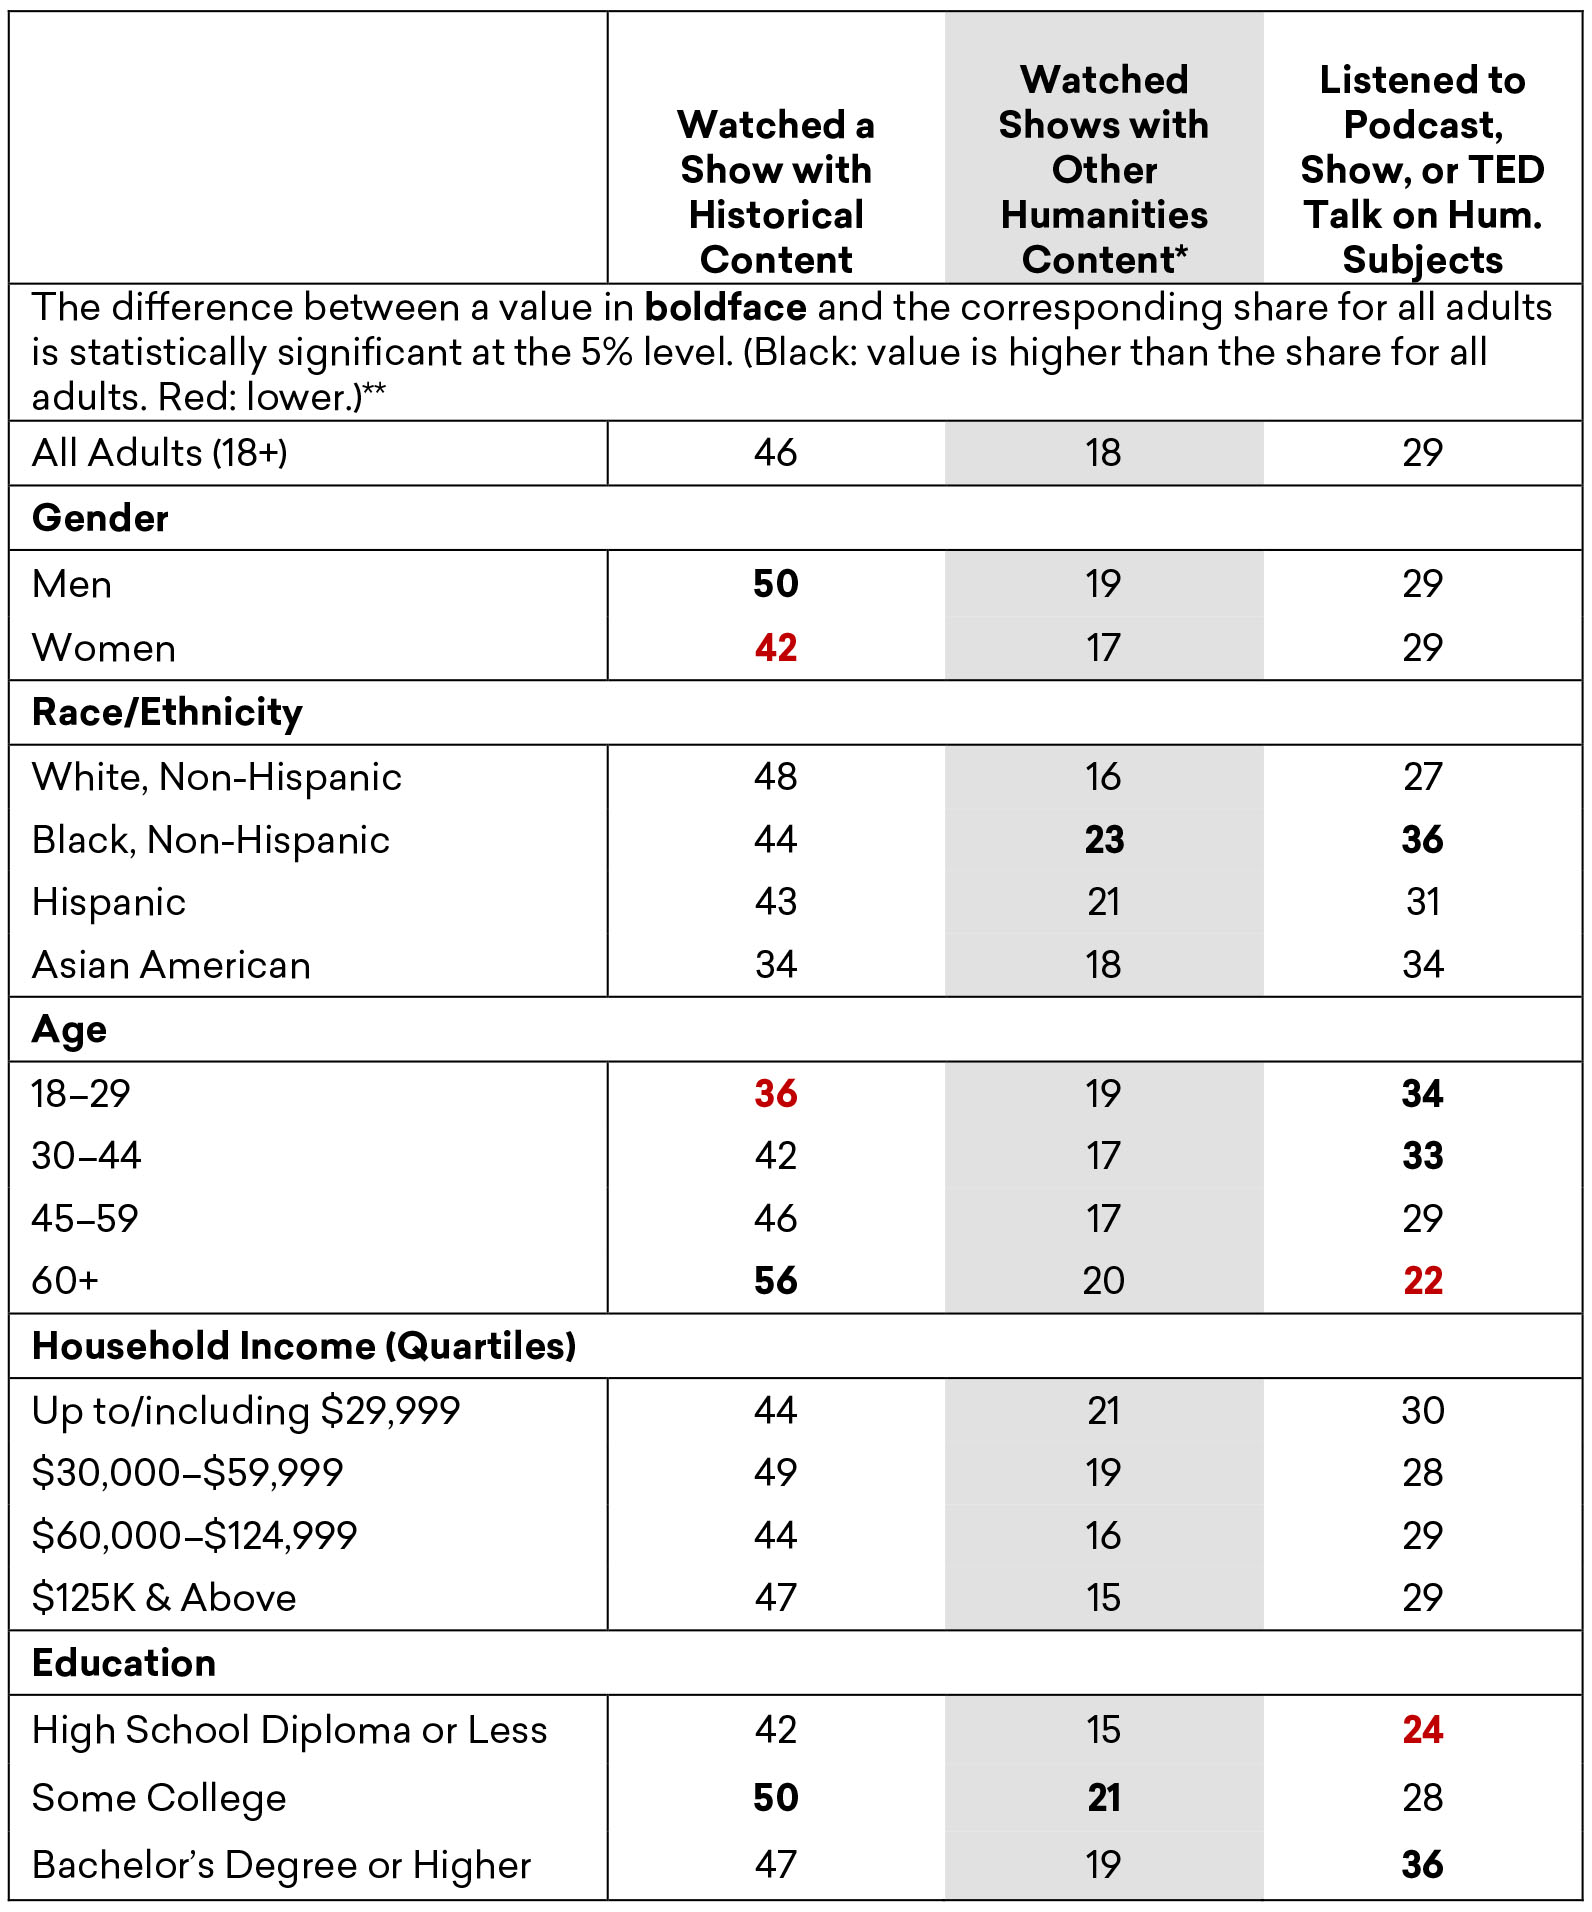 Estimated Share of Adults Who Watched or Listened to Humanities Content Often/Very Often in the Previous 12 Months, by Demographic Group, Fall 2019